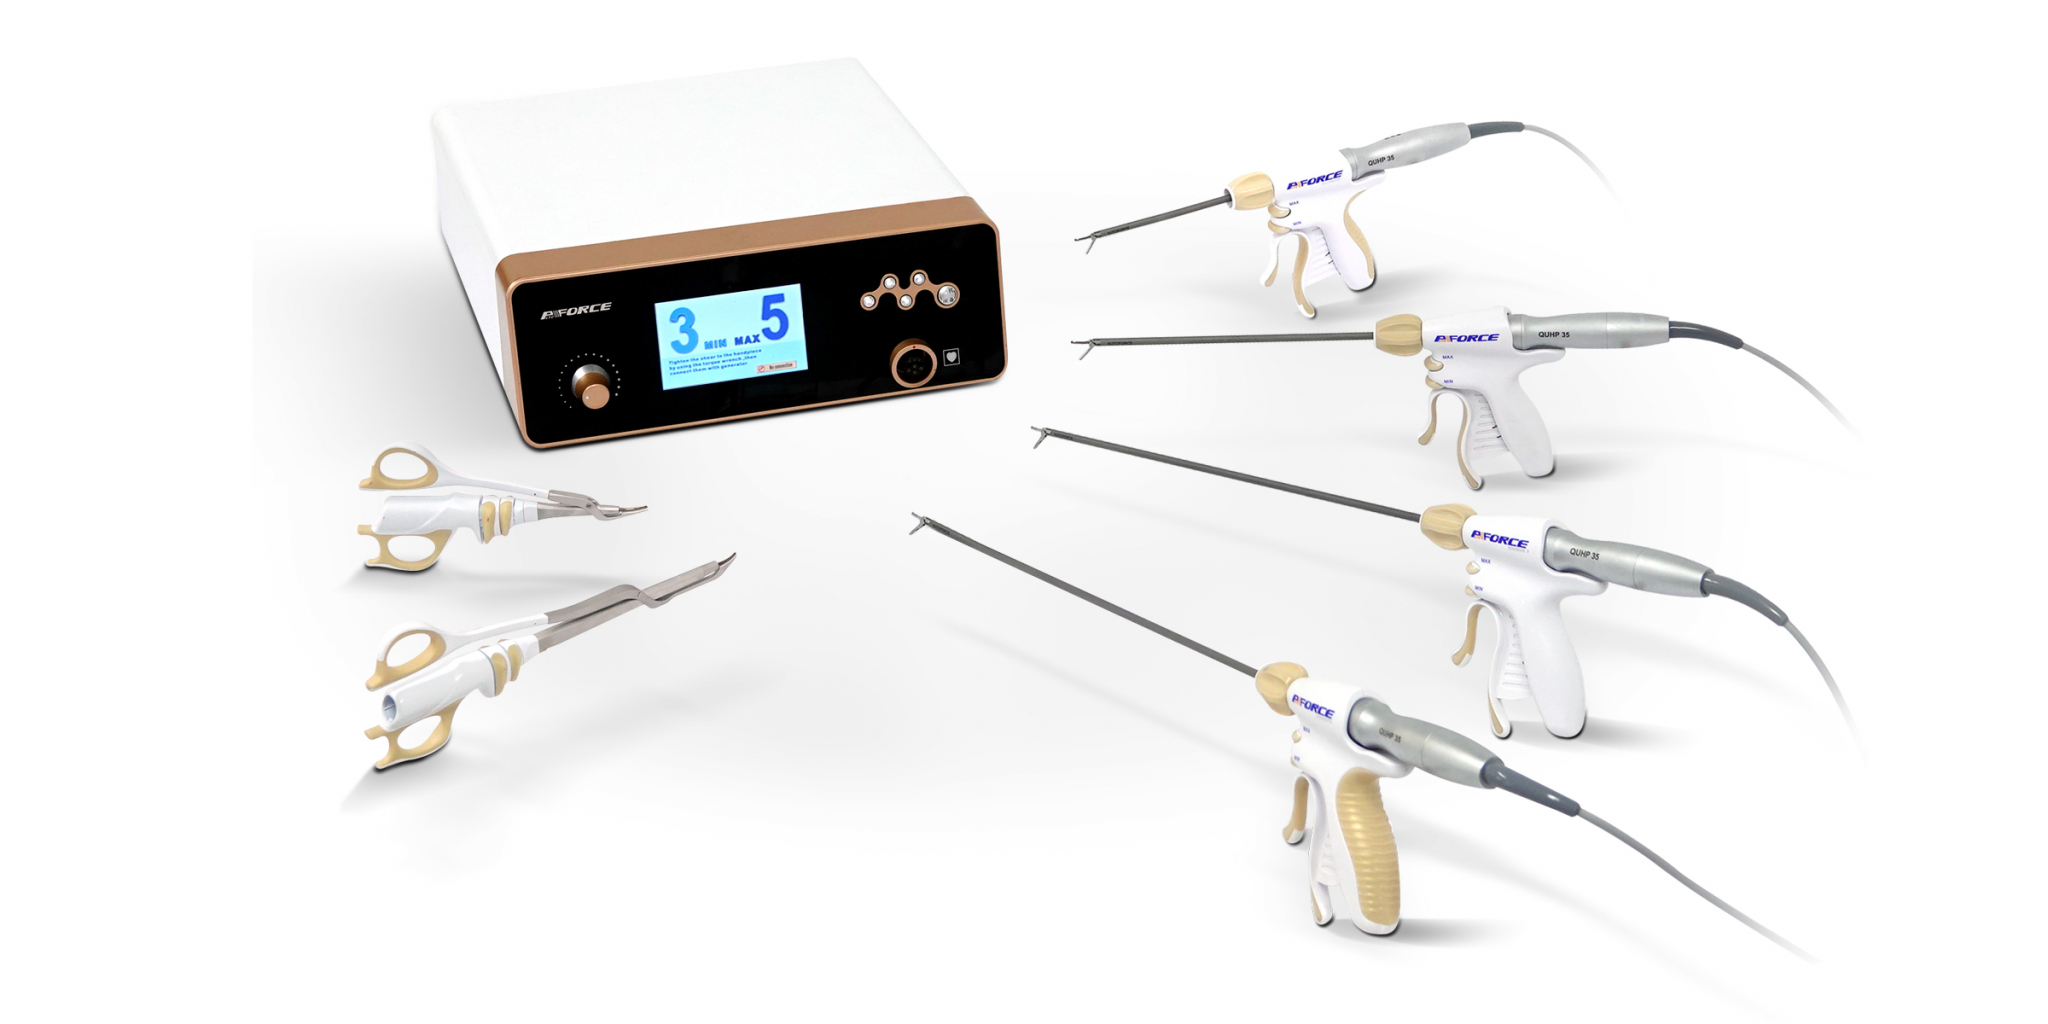 Ultrasonic Surgical System